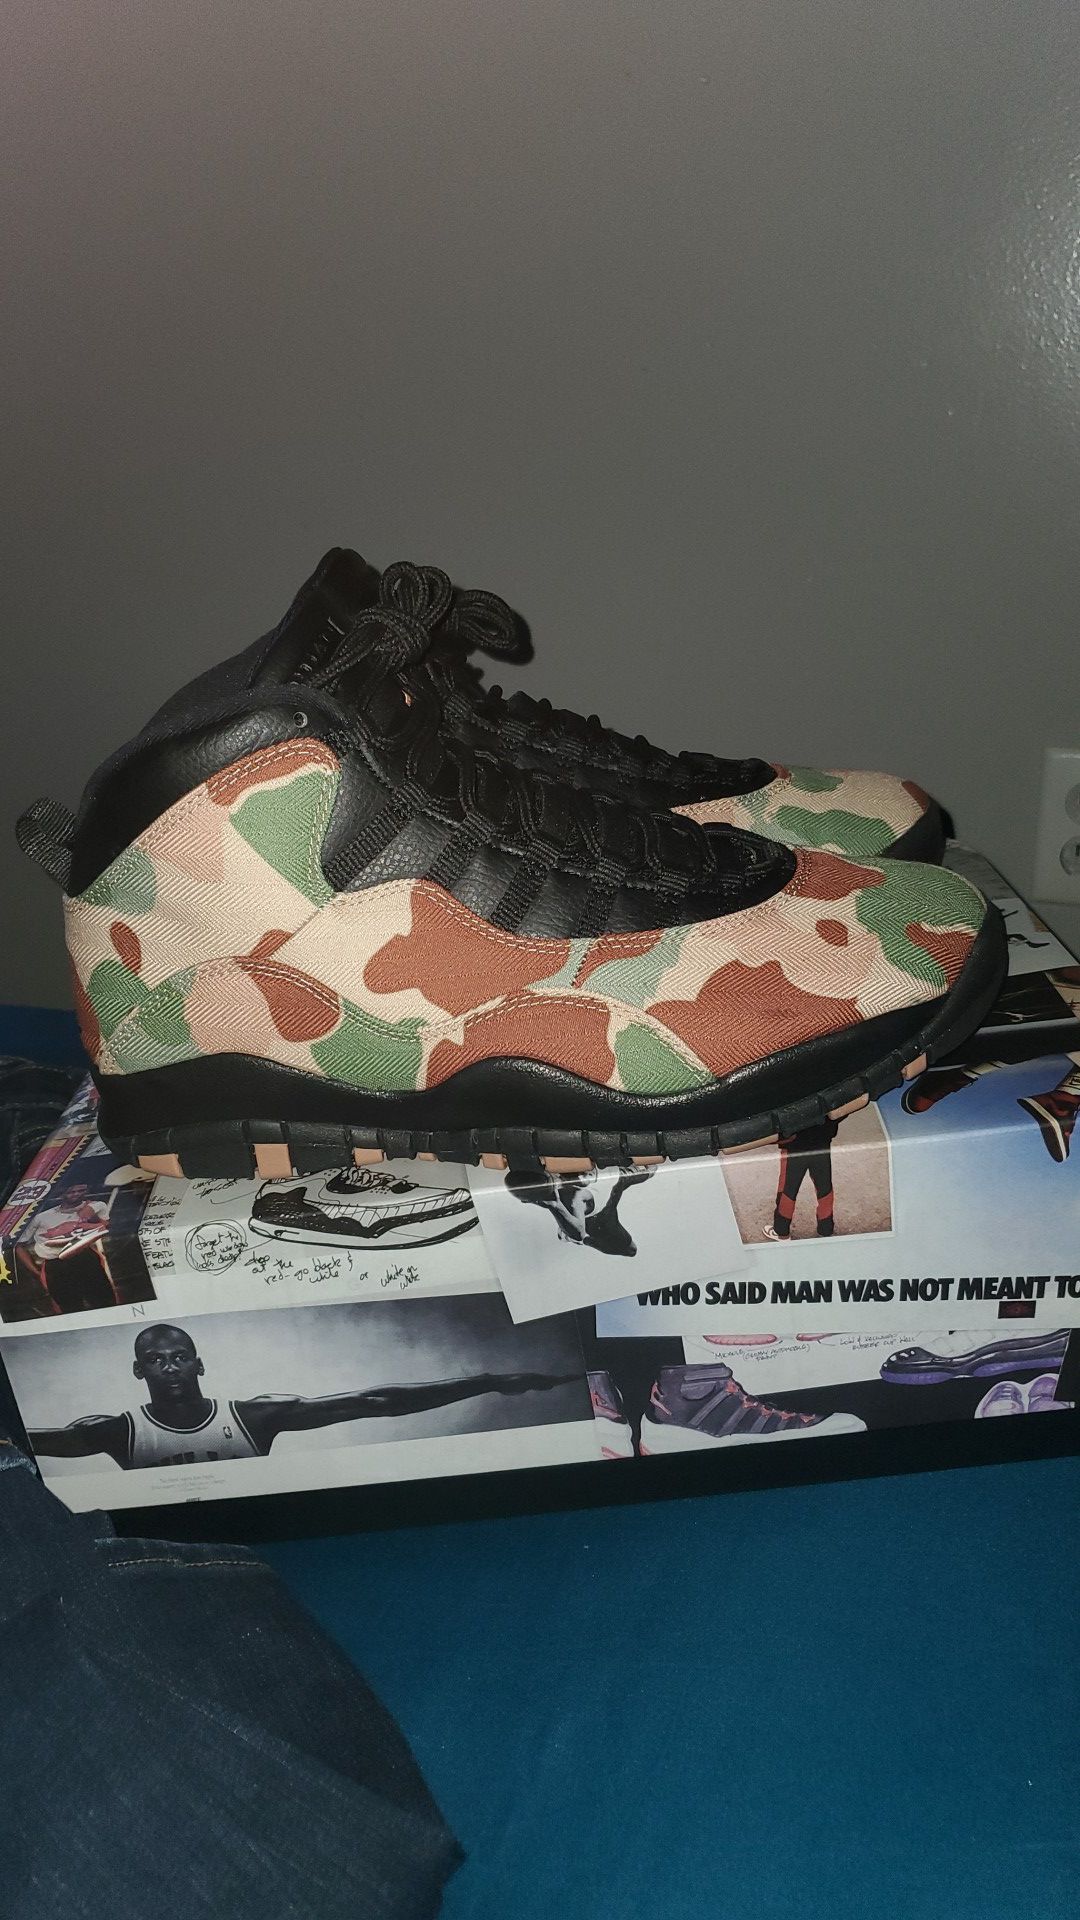 JORDAN DUCK CAMO 10 ! DEADSTOCK SIZE 9.5 ! WILL TRADE FOR ANY JORDANS SIZE 9. OR $160 PRICE IS NEGOTIABLE ! TRADES OR CASH !